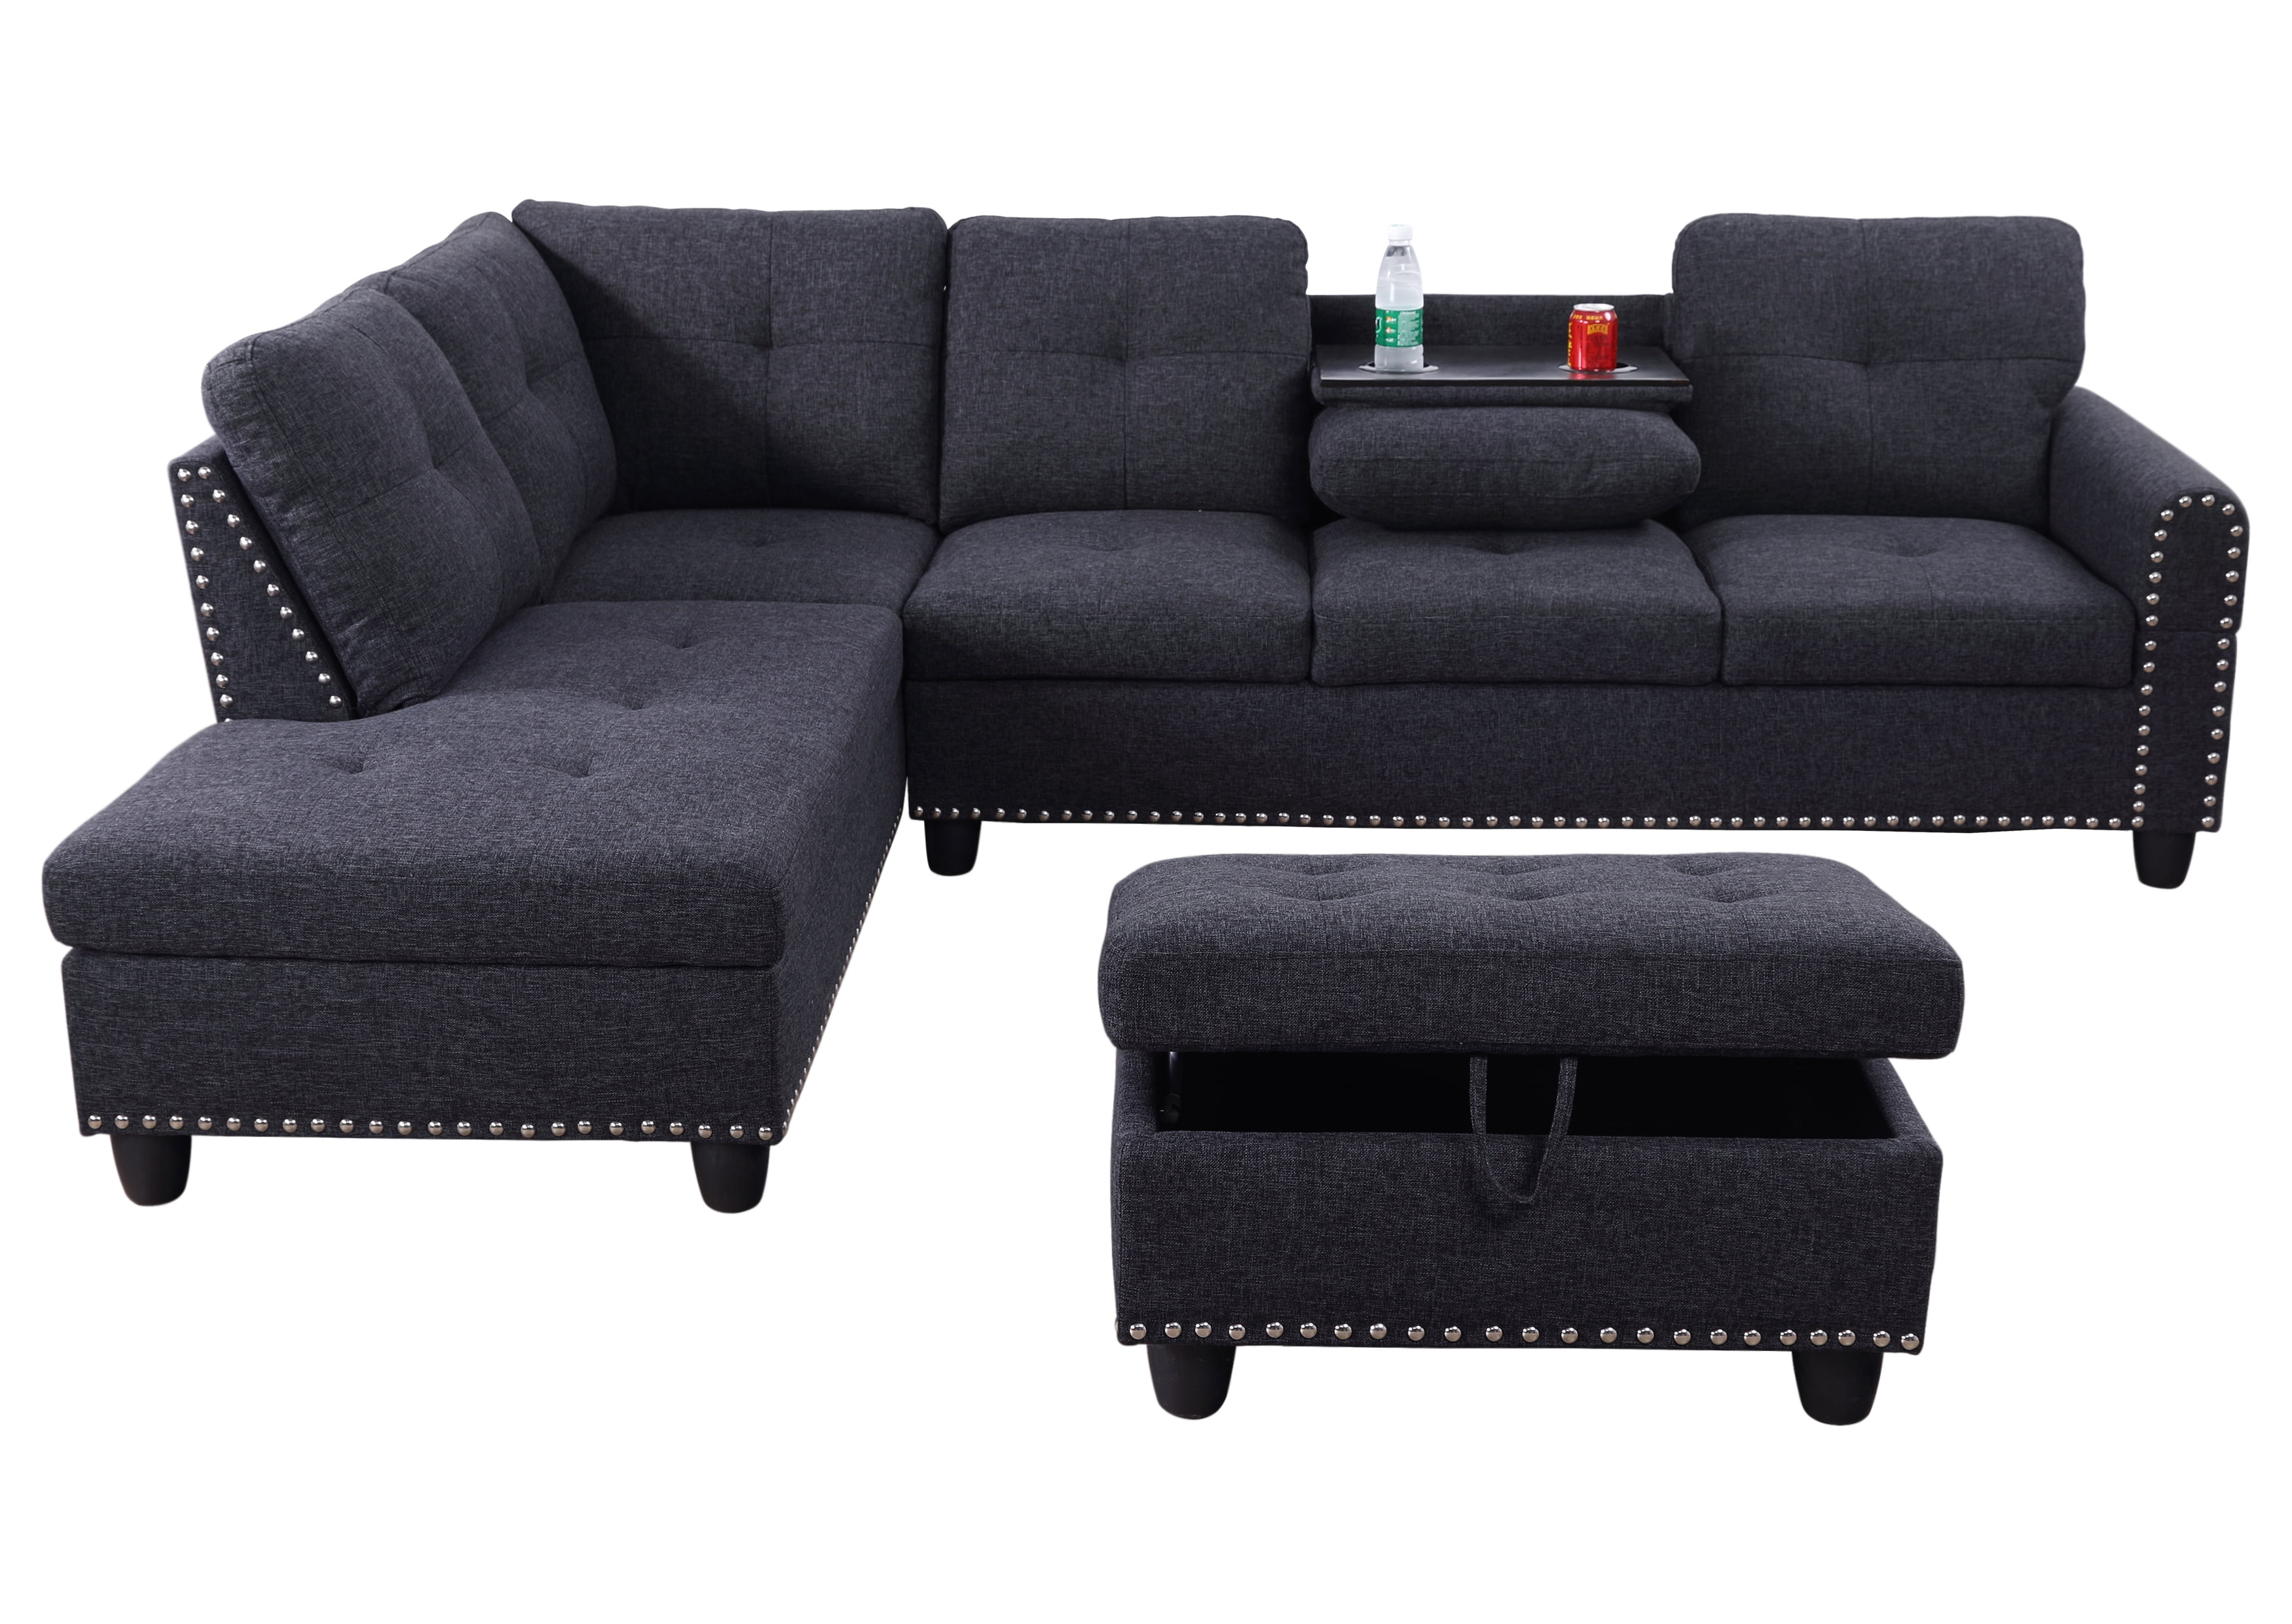 Aycp Furniture New Style L Shape Sectional Sofa Set With Storage